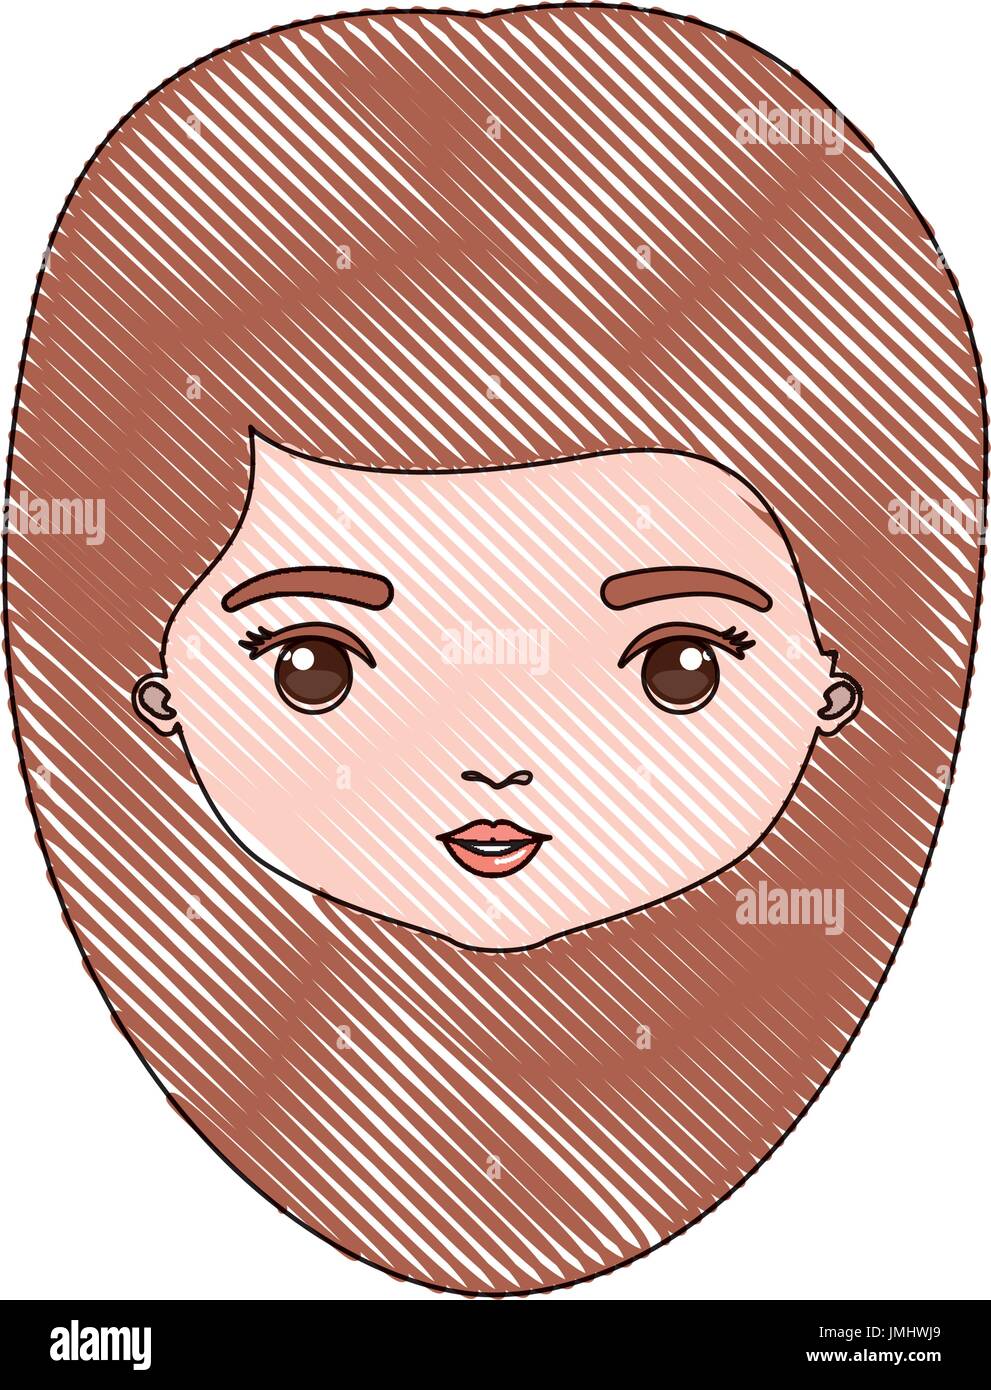 color crayon silhouette caricature closeup front view face woman with medium hairstyle Stock Vector